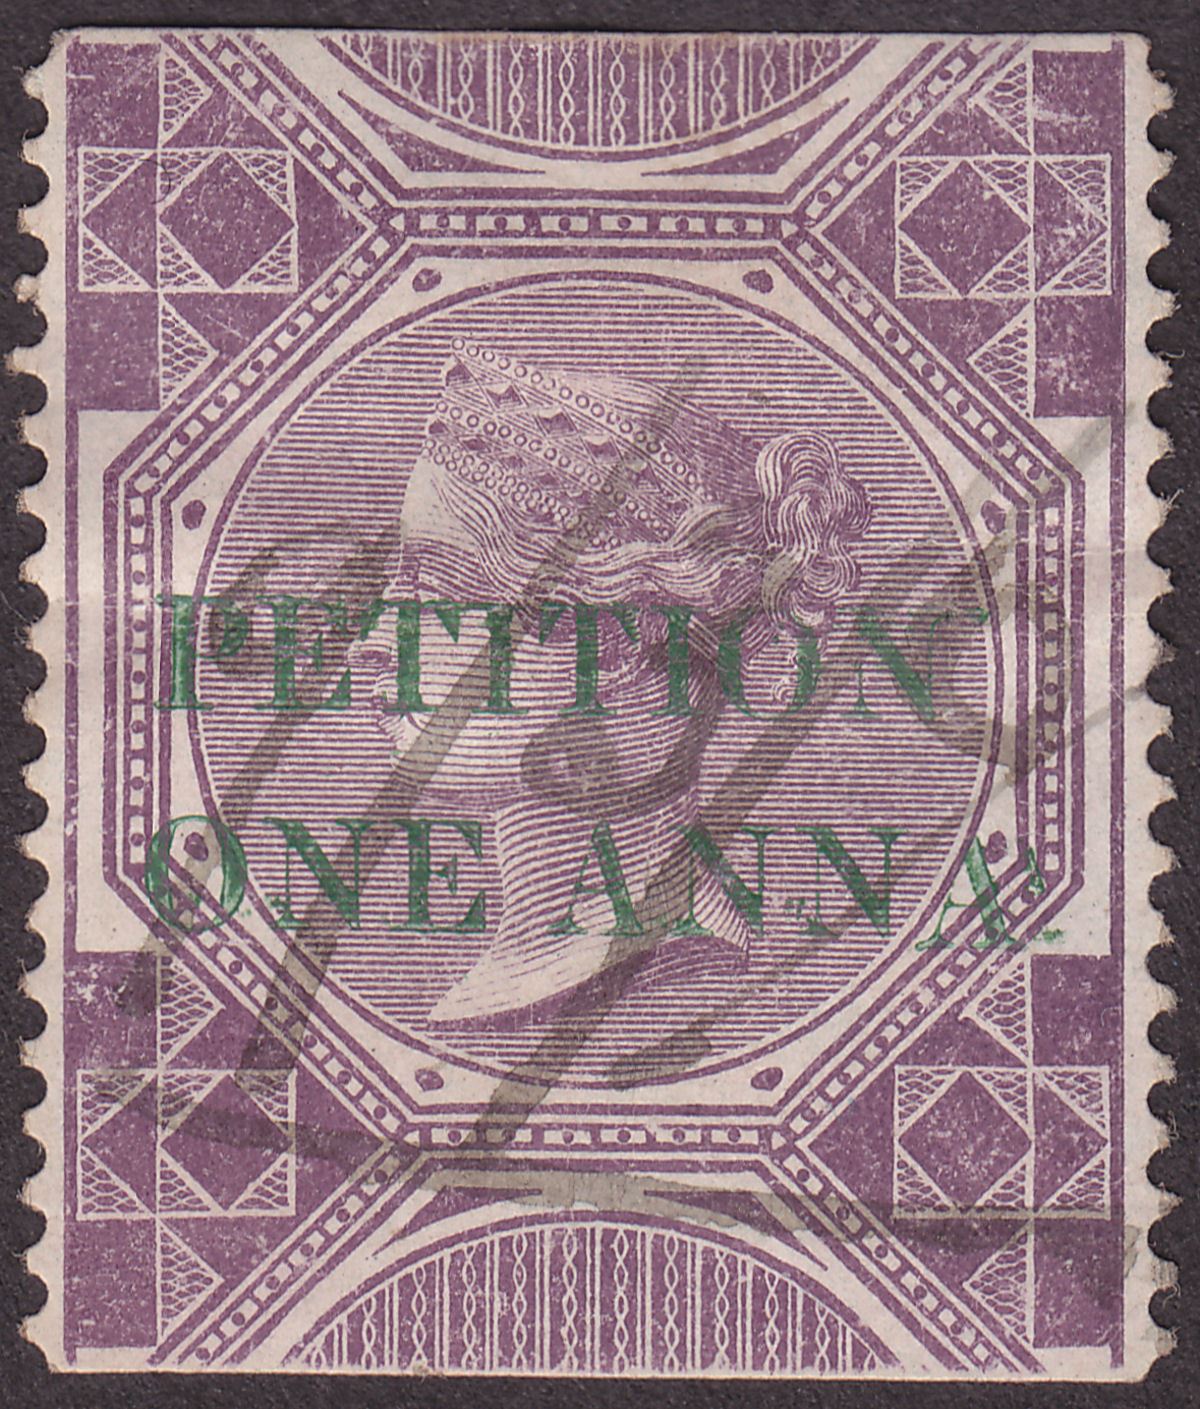 India 1867 QV Revenue Petition Overprint Foreign Bill 1a on 4r Purple Used BF3